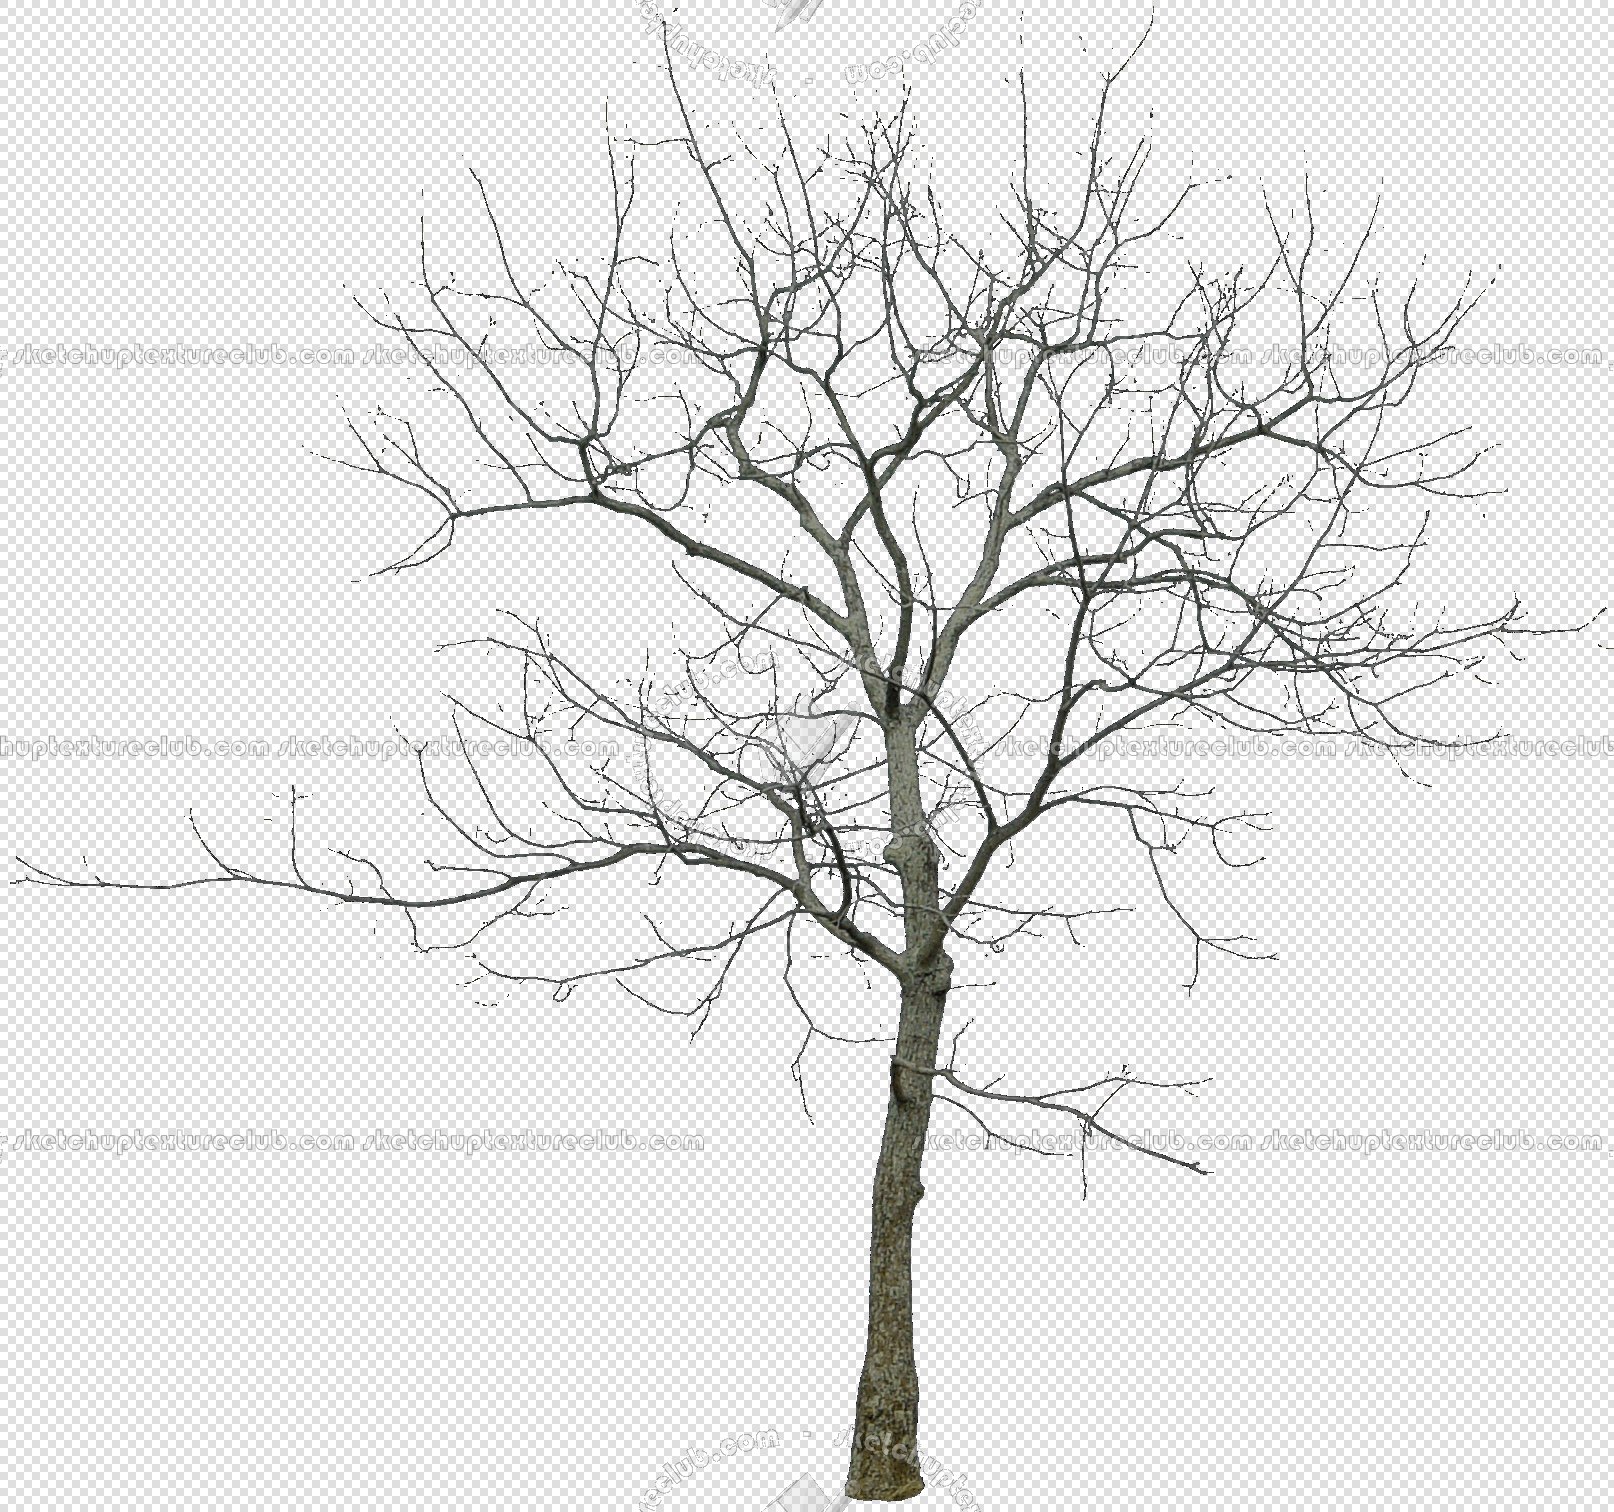 Packs - CUT OUT - Vegetation - Trees - CUT OUT WINTER TREES PACK 1 00036